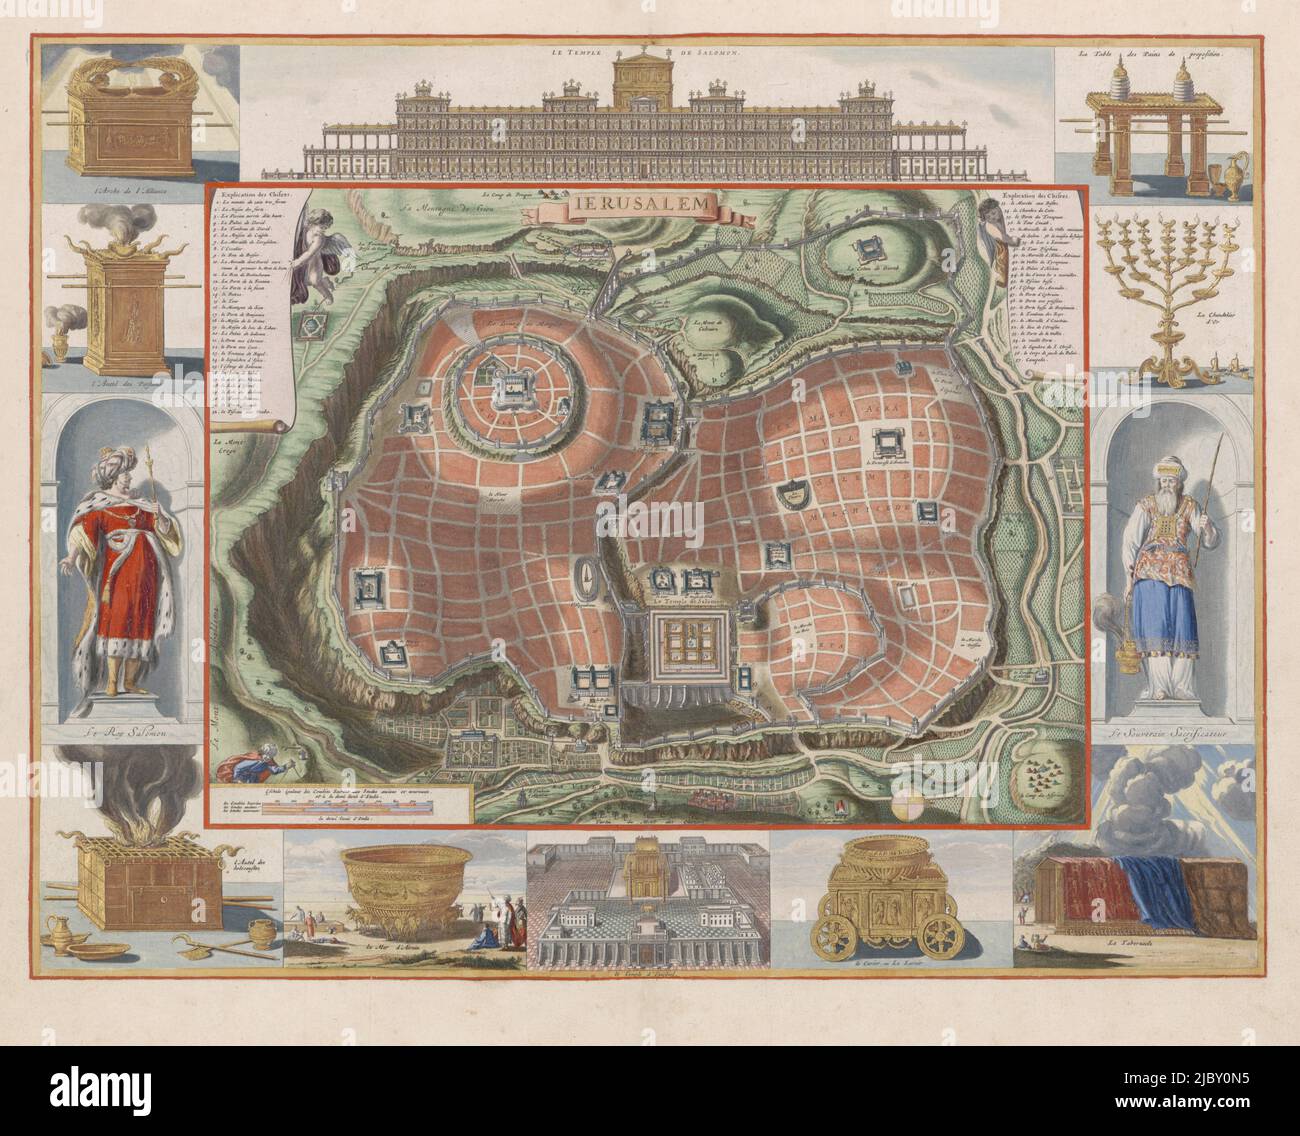 Map of the Temple Mount of Jerusalem from the east. In the rim different representations of the different temples and the temple utensils. Clockwise, in the middle above the temple of Solomon, the table for the shewbread, the seven-armed candlestick, in a niche a statue of the high priest Aaron, the tabernacle, a golden basin, the temple of Ezekiel, the basin called the Sea, the altar, in a niche a statue of King Solomon, the incense block and the Ark of the Covenant, View of the Temple Mount of Jerusalem from the east., print maker: anonymous, Dirk Janszoon van Santen, (attributed to), print Stock Photo